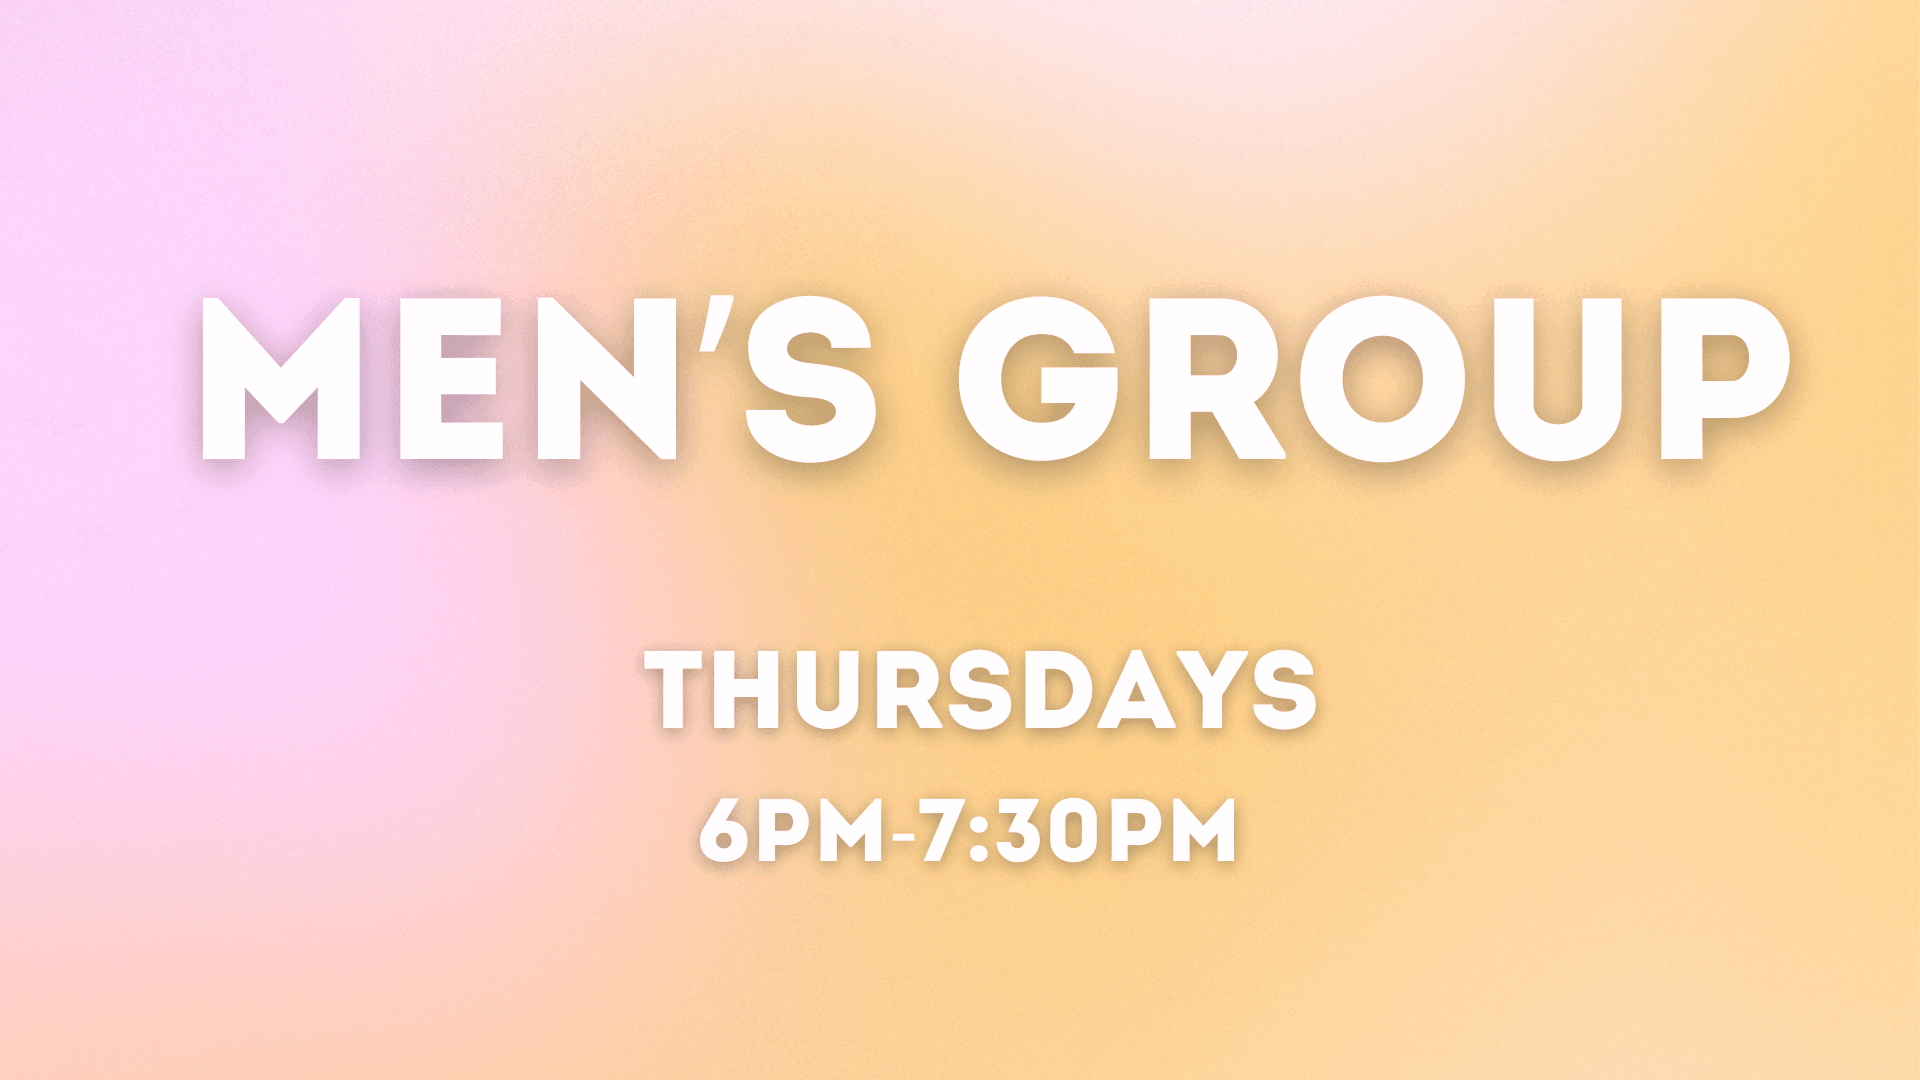 An image with the information for Men's Group